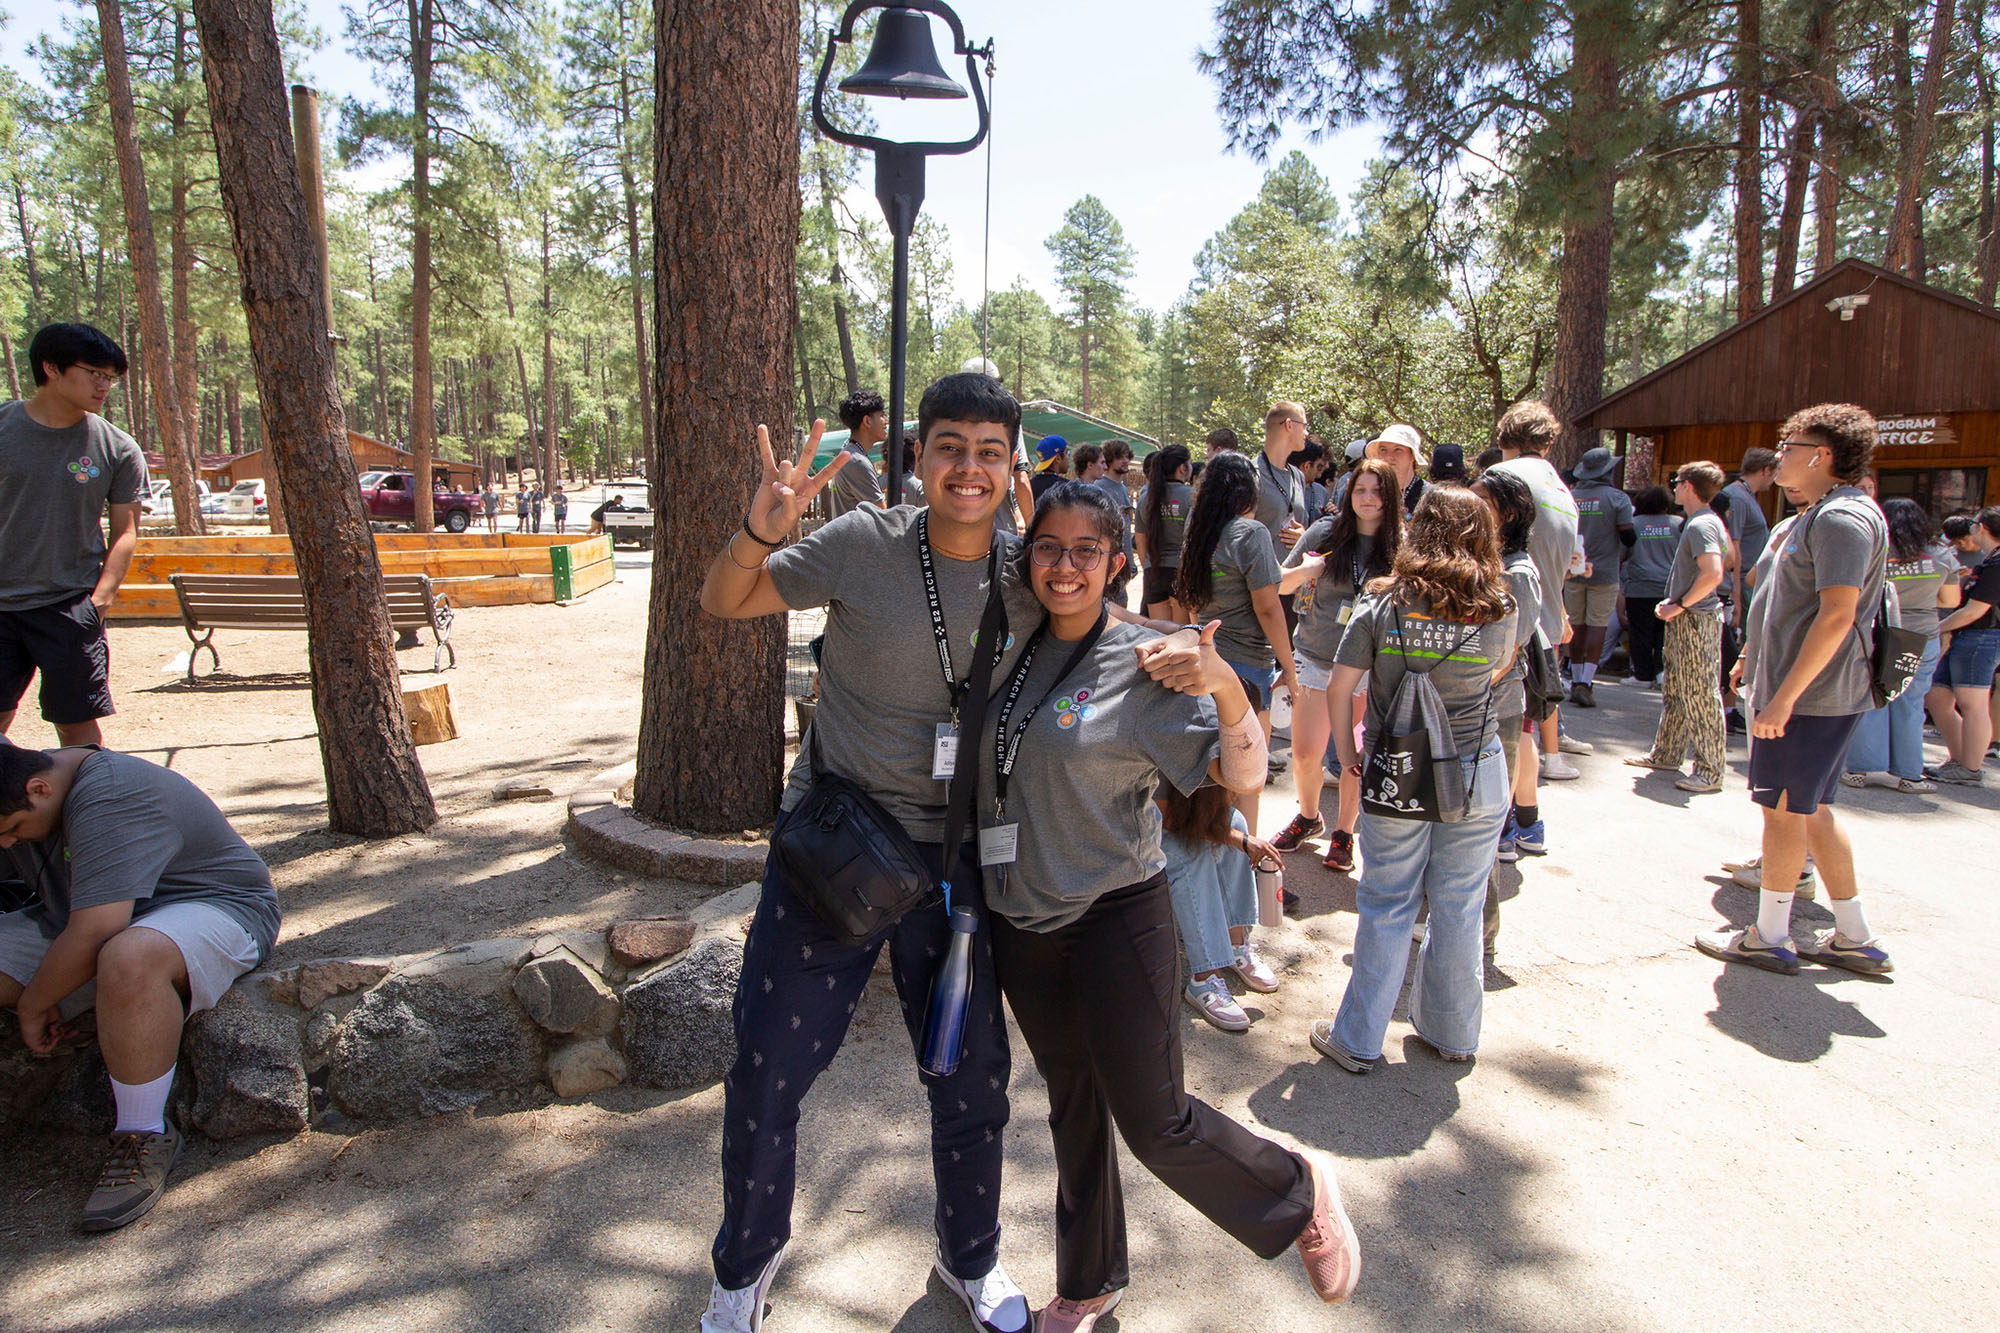 Two students pose with the fork symbol held up at a campground with lots of trees behind them.